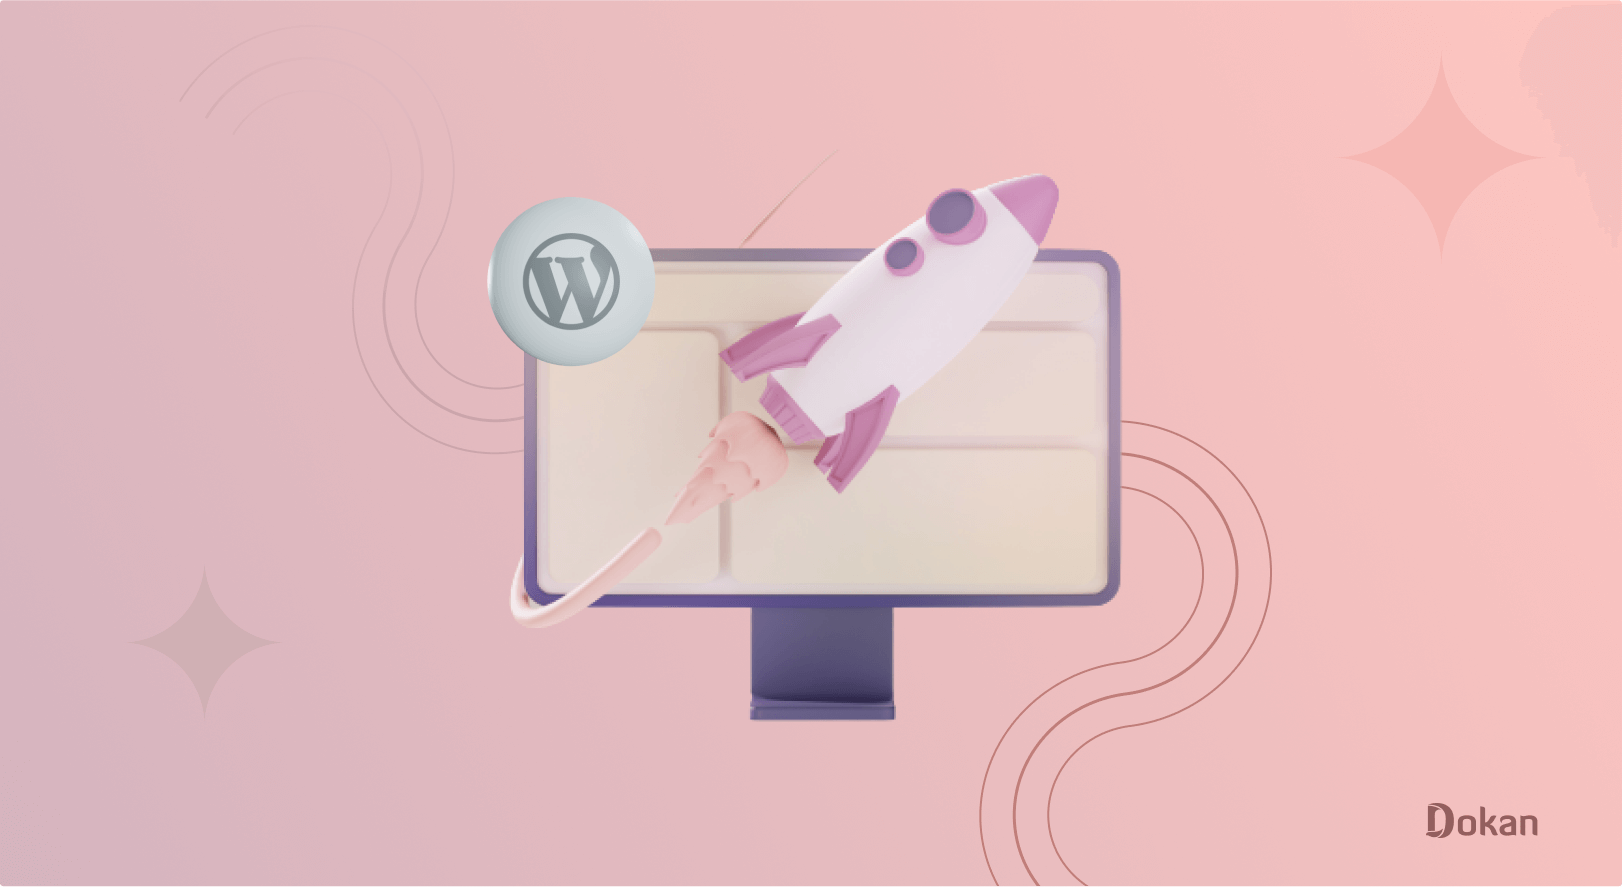 This is the feature image of the How to speed up a WordPress site blog